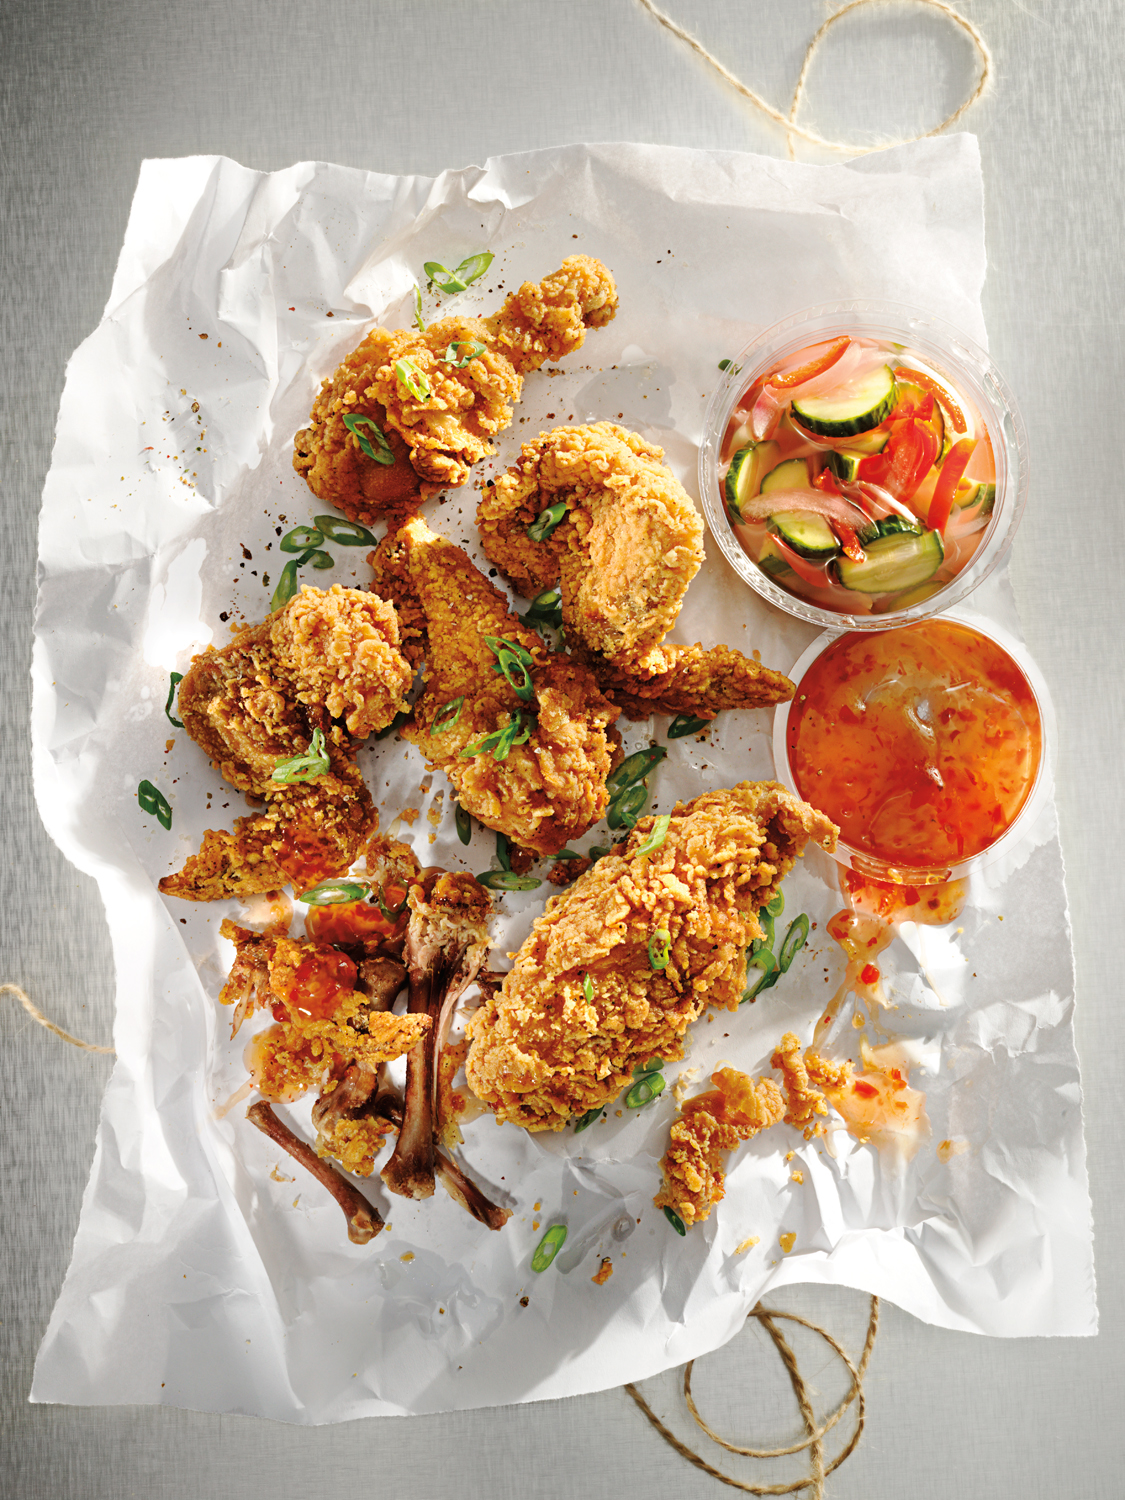 Spicy fried chicken pieces with Asian sauce on wax paper picnic lunch  — Studio 3, Inc.